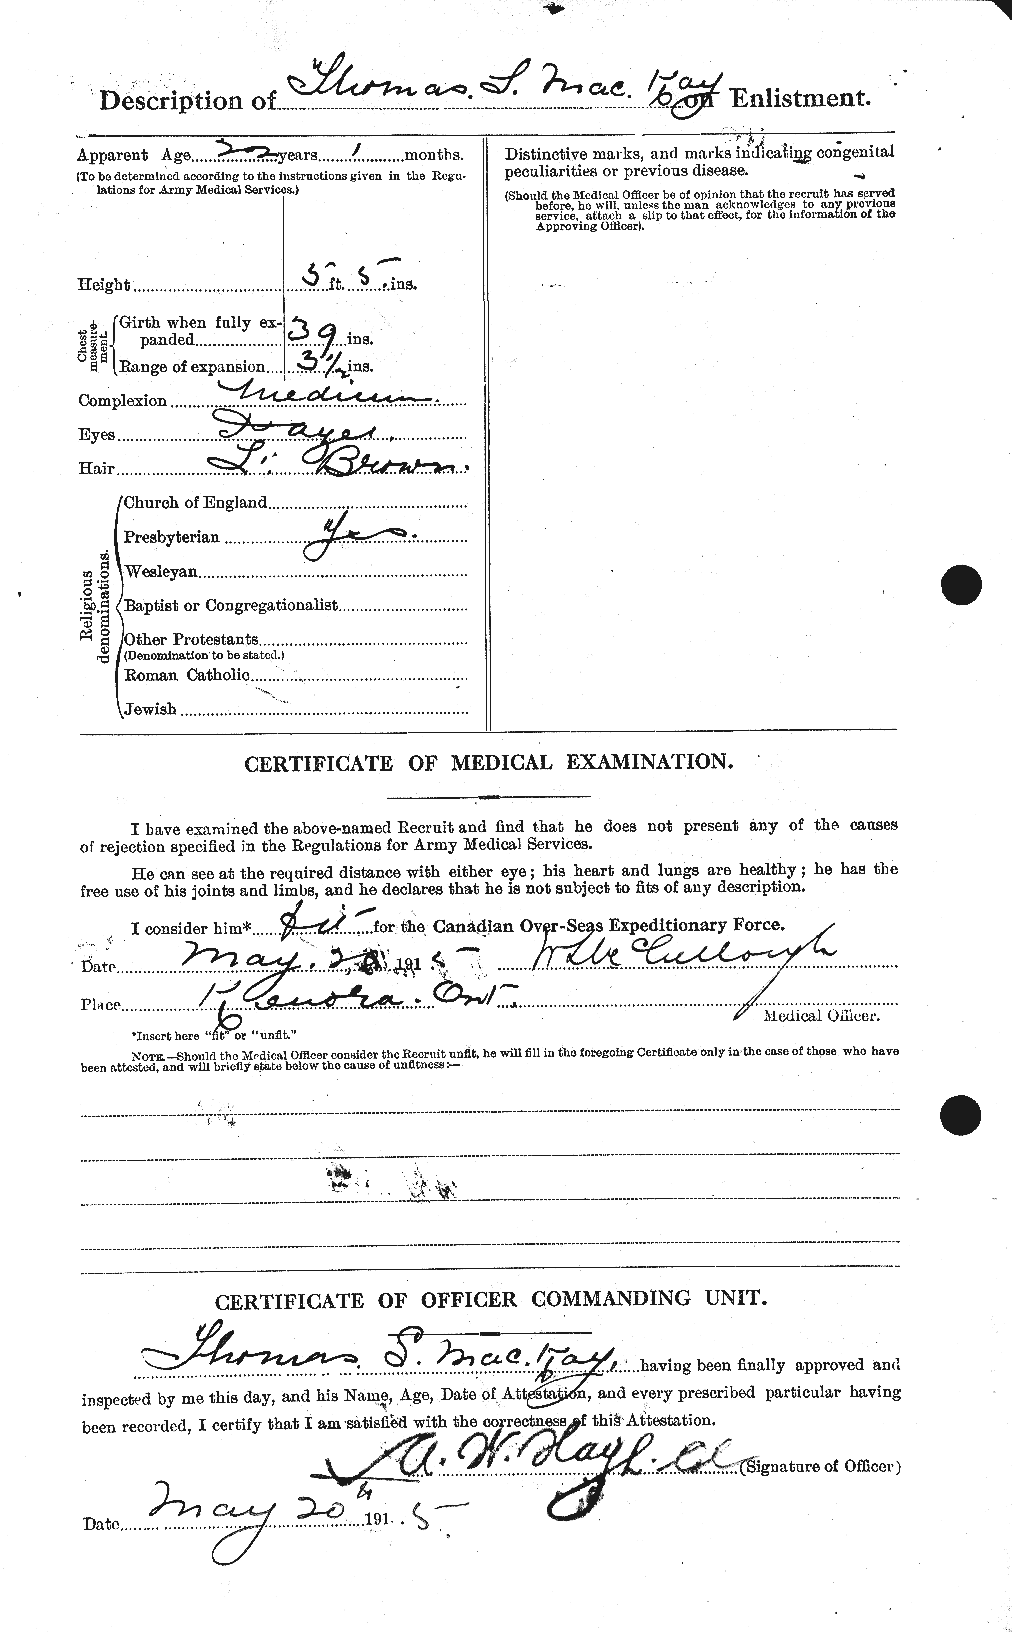 Personnel Records of the First World War - CEF 530175b